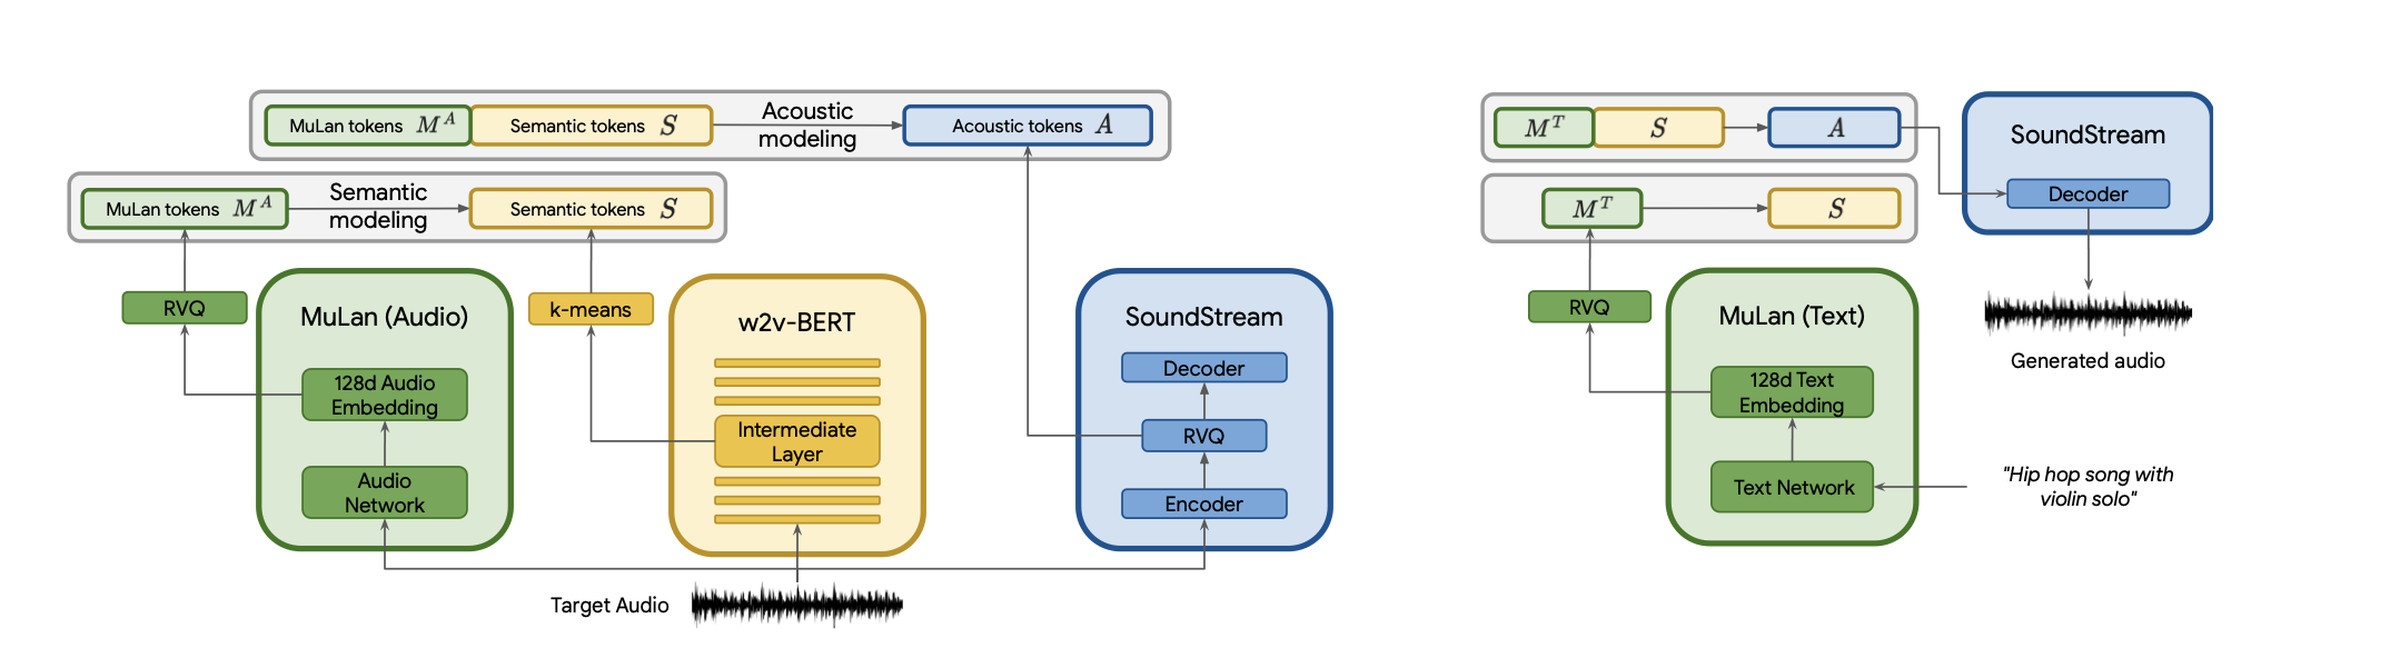 Figure showing part of MusicLM’s process, which involves SoundStream, w2v-BERT, and MuLan.